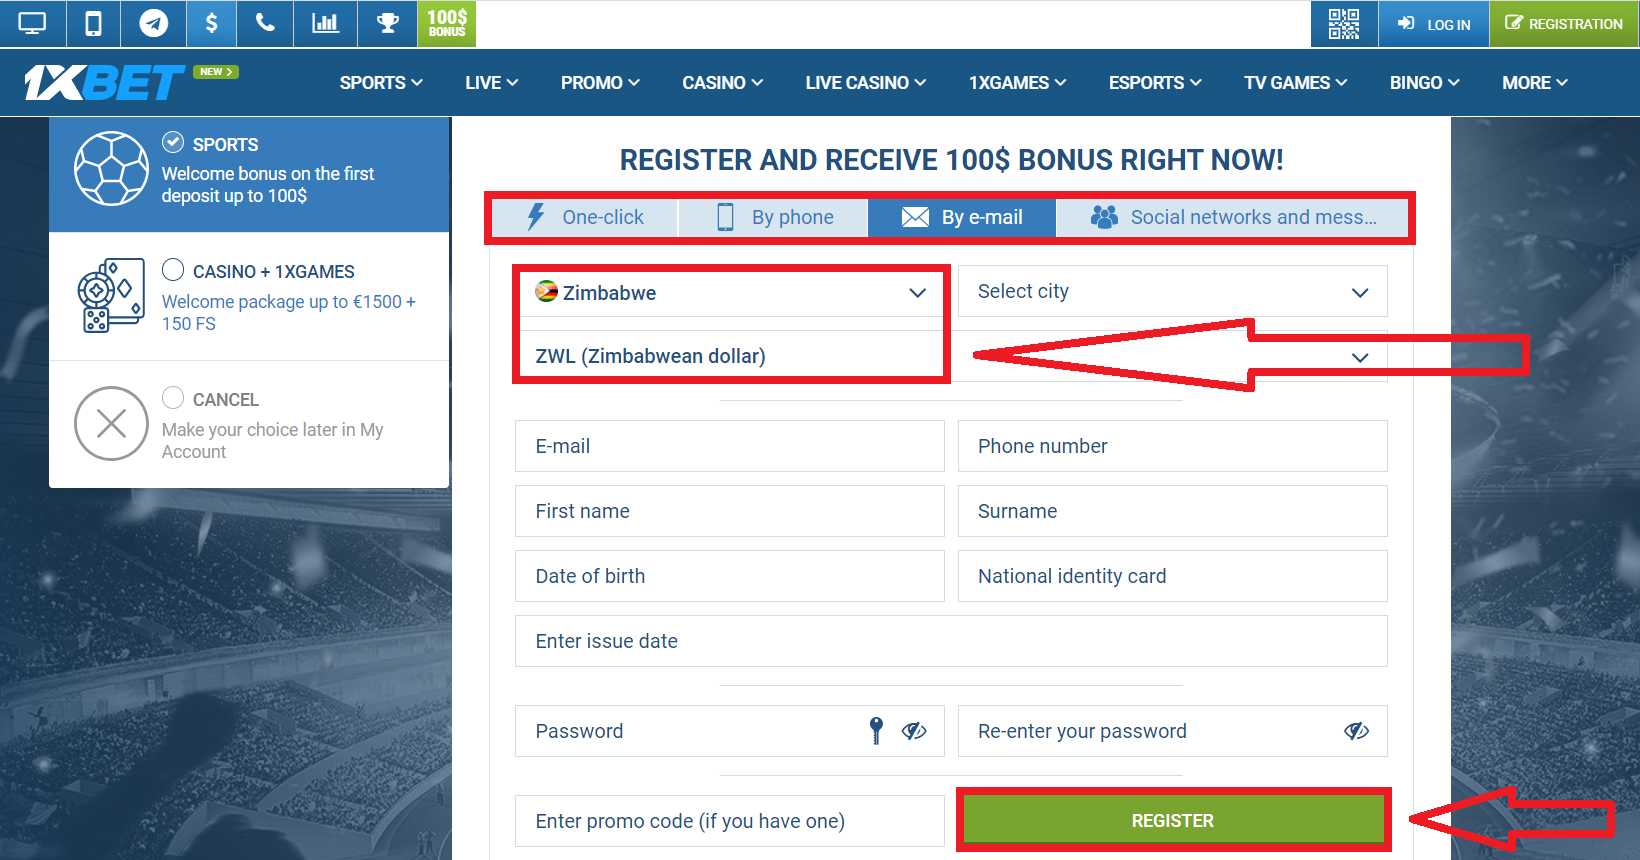 How to login into the 1xBet platform